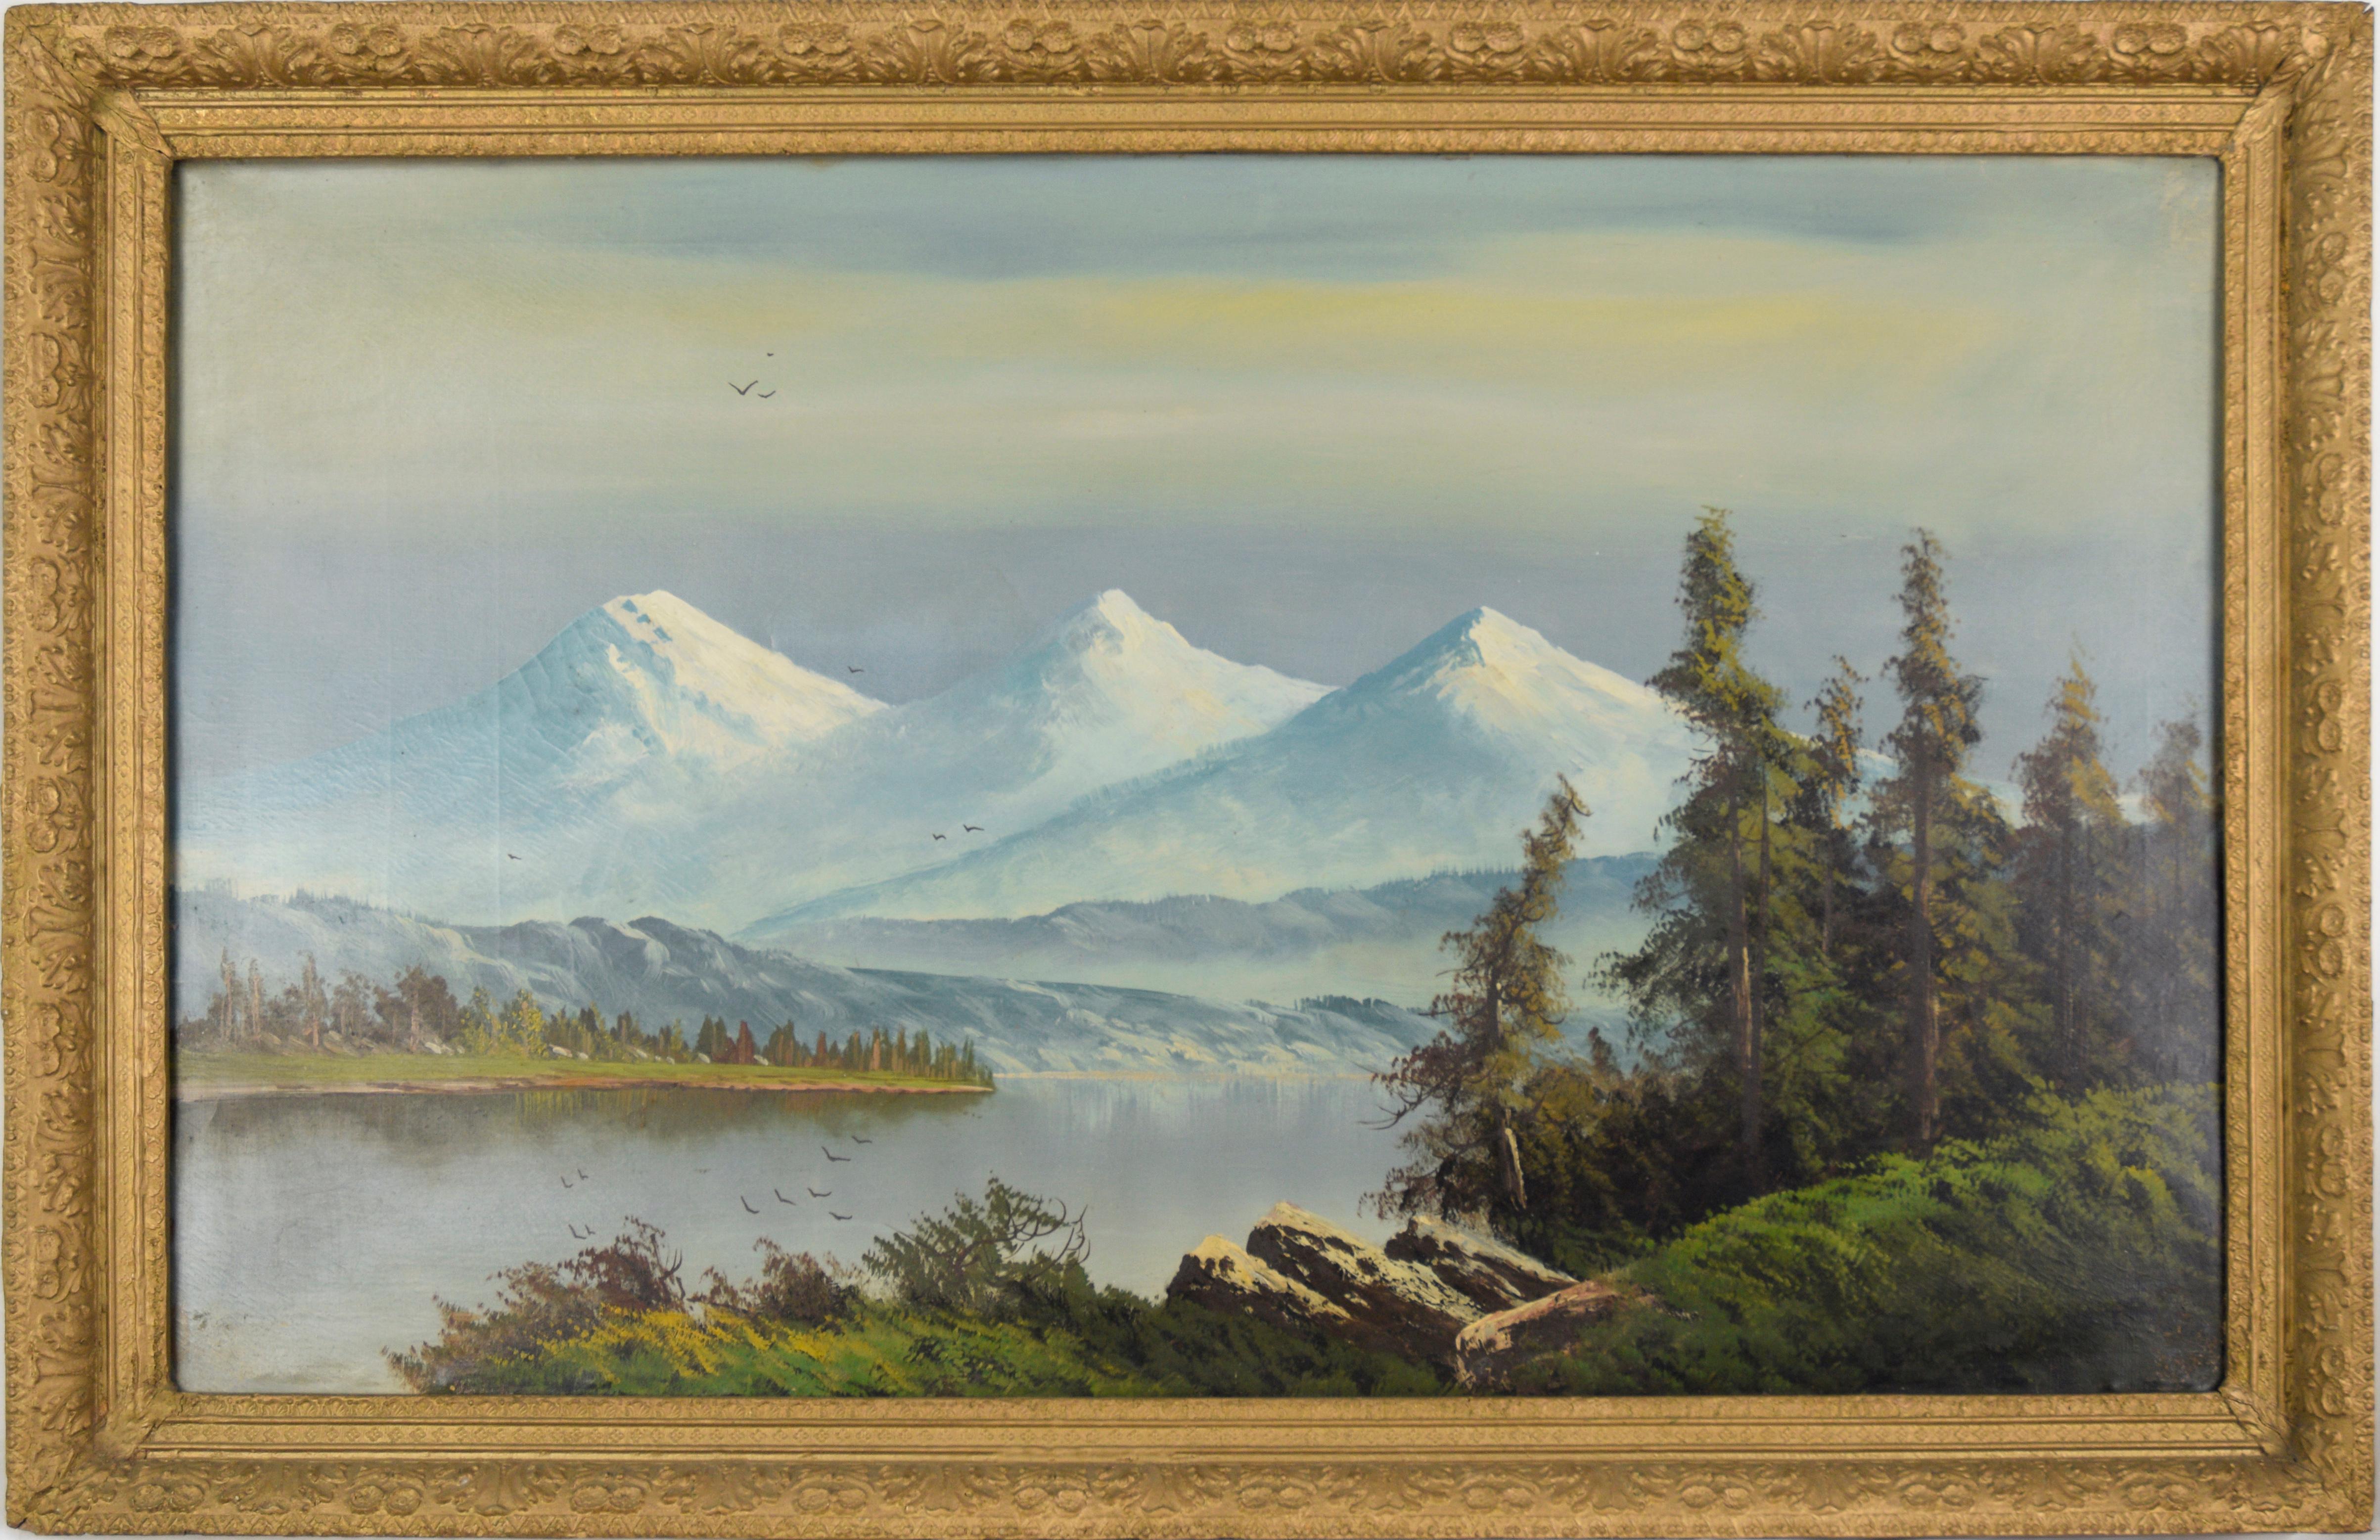 John Englehart Landscape Painting - Three Sisters in the Cascade Range, Oregon Lake with Birds Migrating